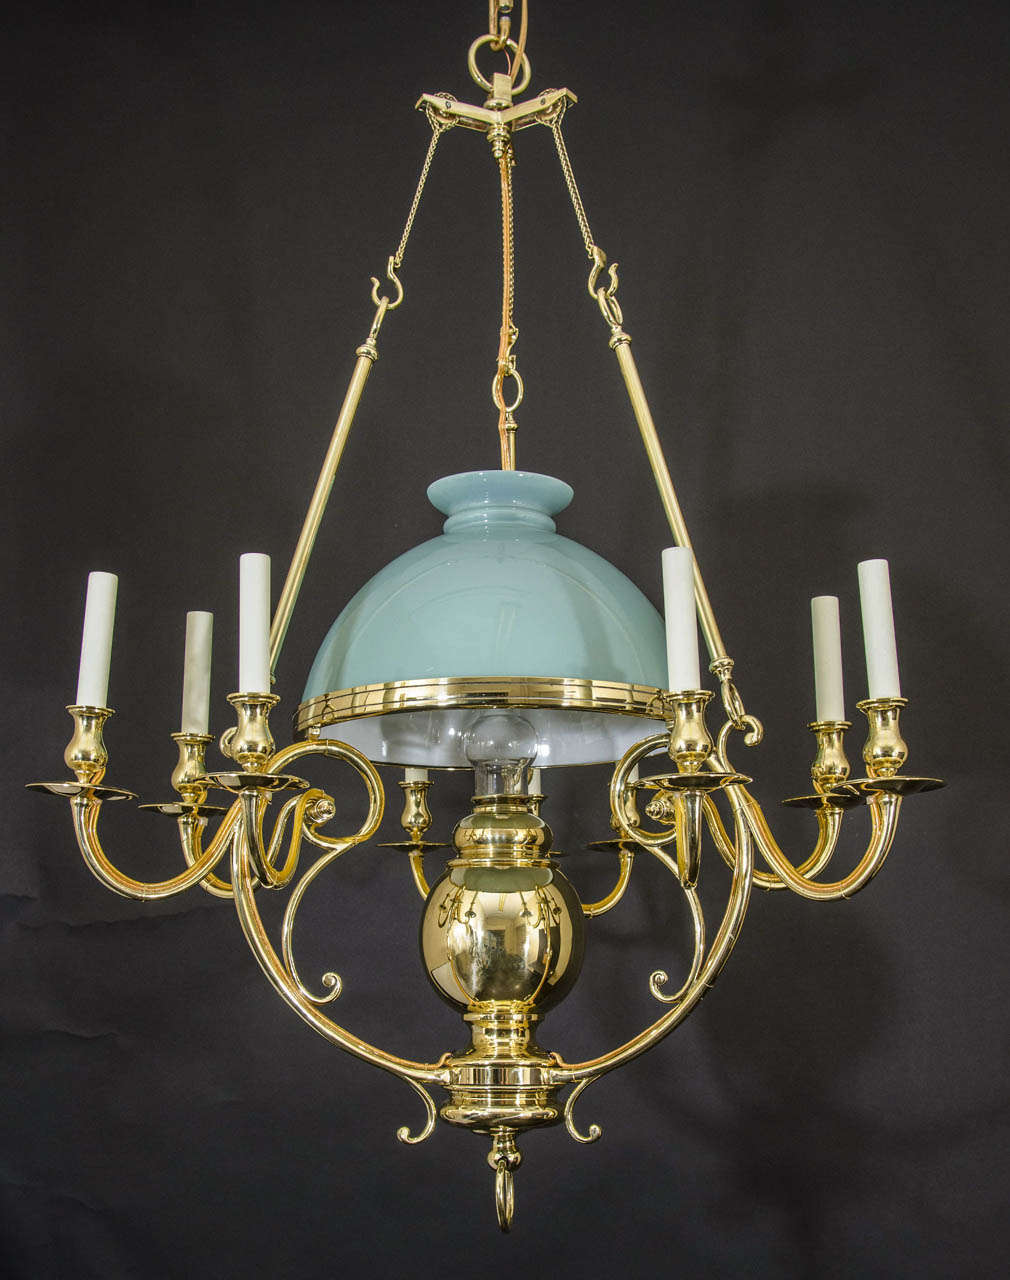 Polished Brass Ten Light Counter Weight Chandelier With Center Oil Font And Opaline Glass Shade.